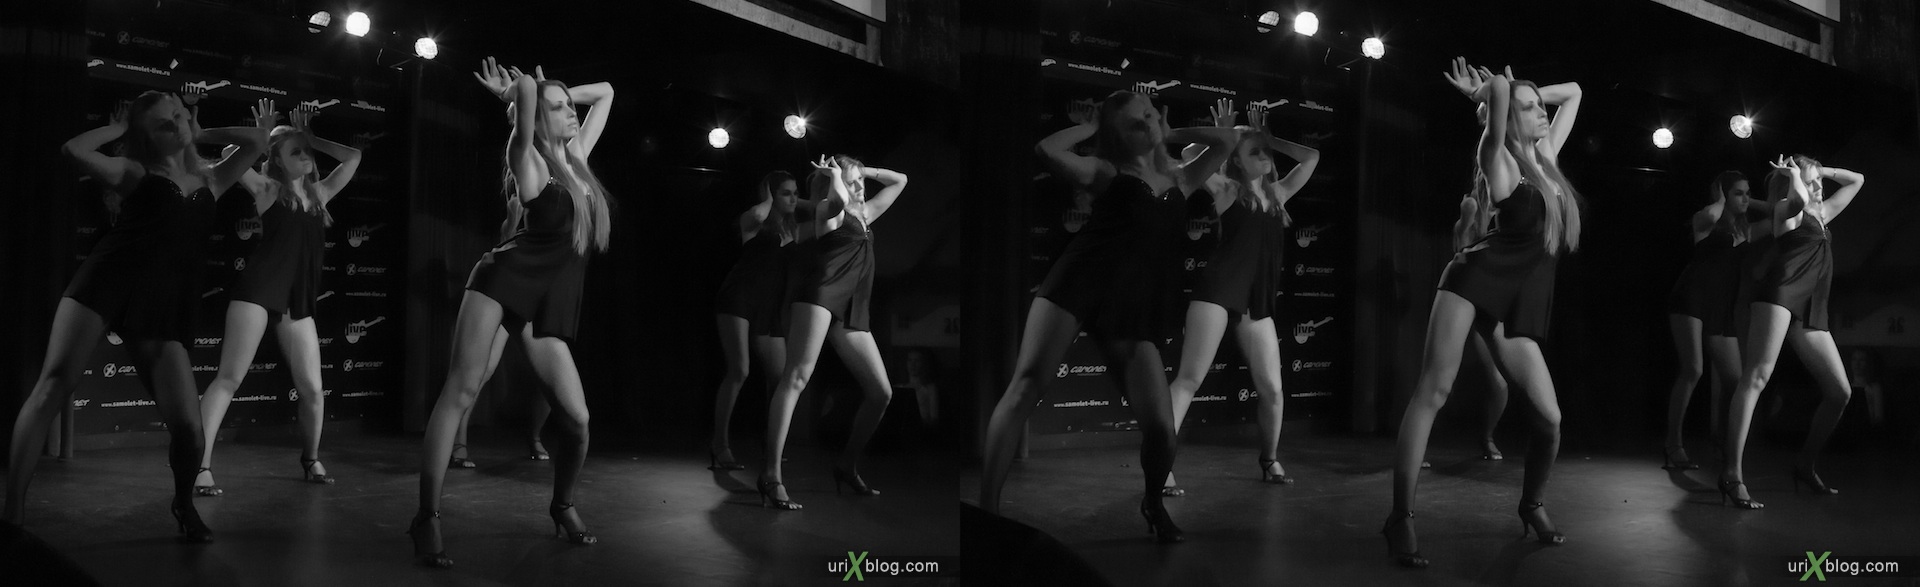 2012, dances, girls, Vesta, Airplane club, Moscow, Russia, 3D, stereo pair, cross-eyed, crossview, cross view stereo pair